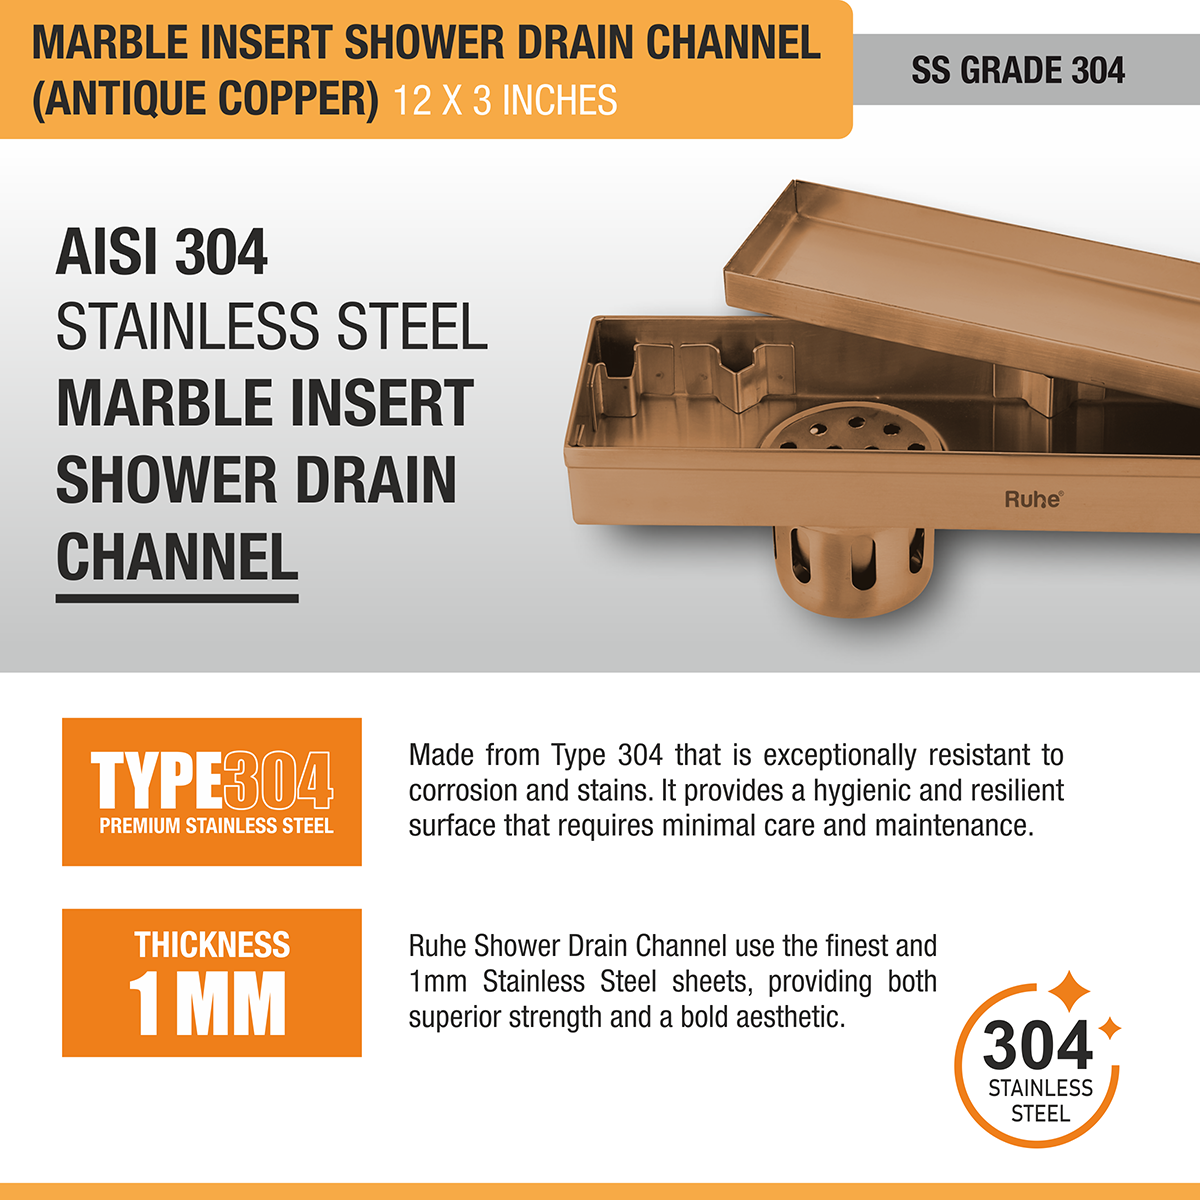 Marble Insert Shower Drain Channel (12 x 3 Inches) ROSE GOLD PVD Coated stainless steel